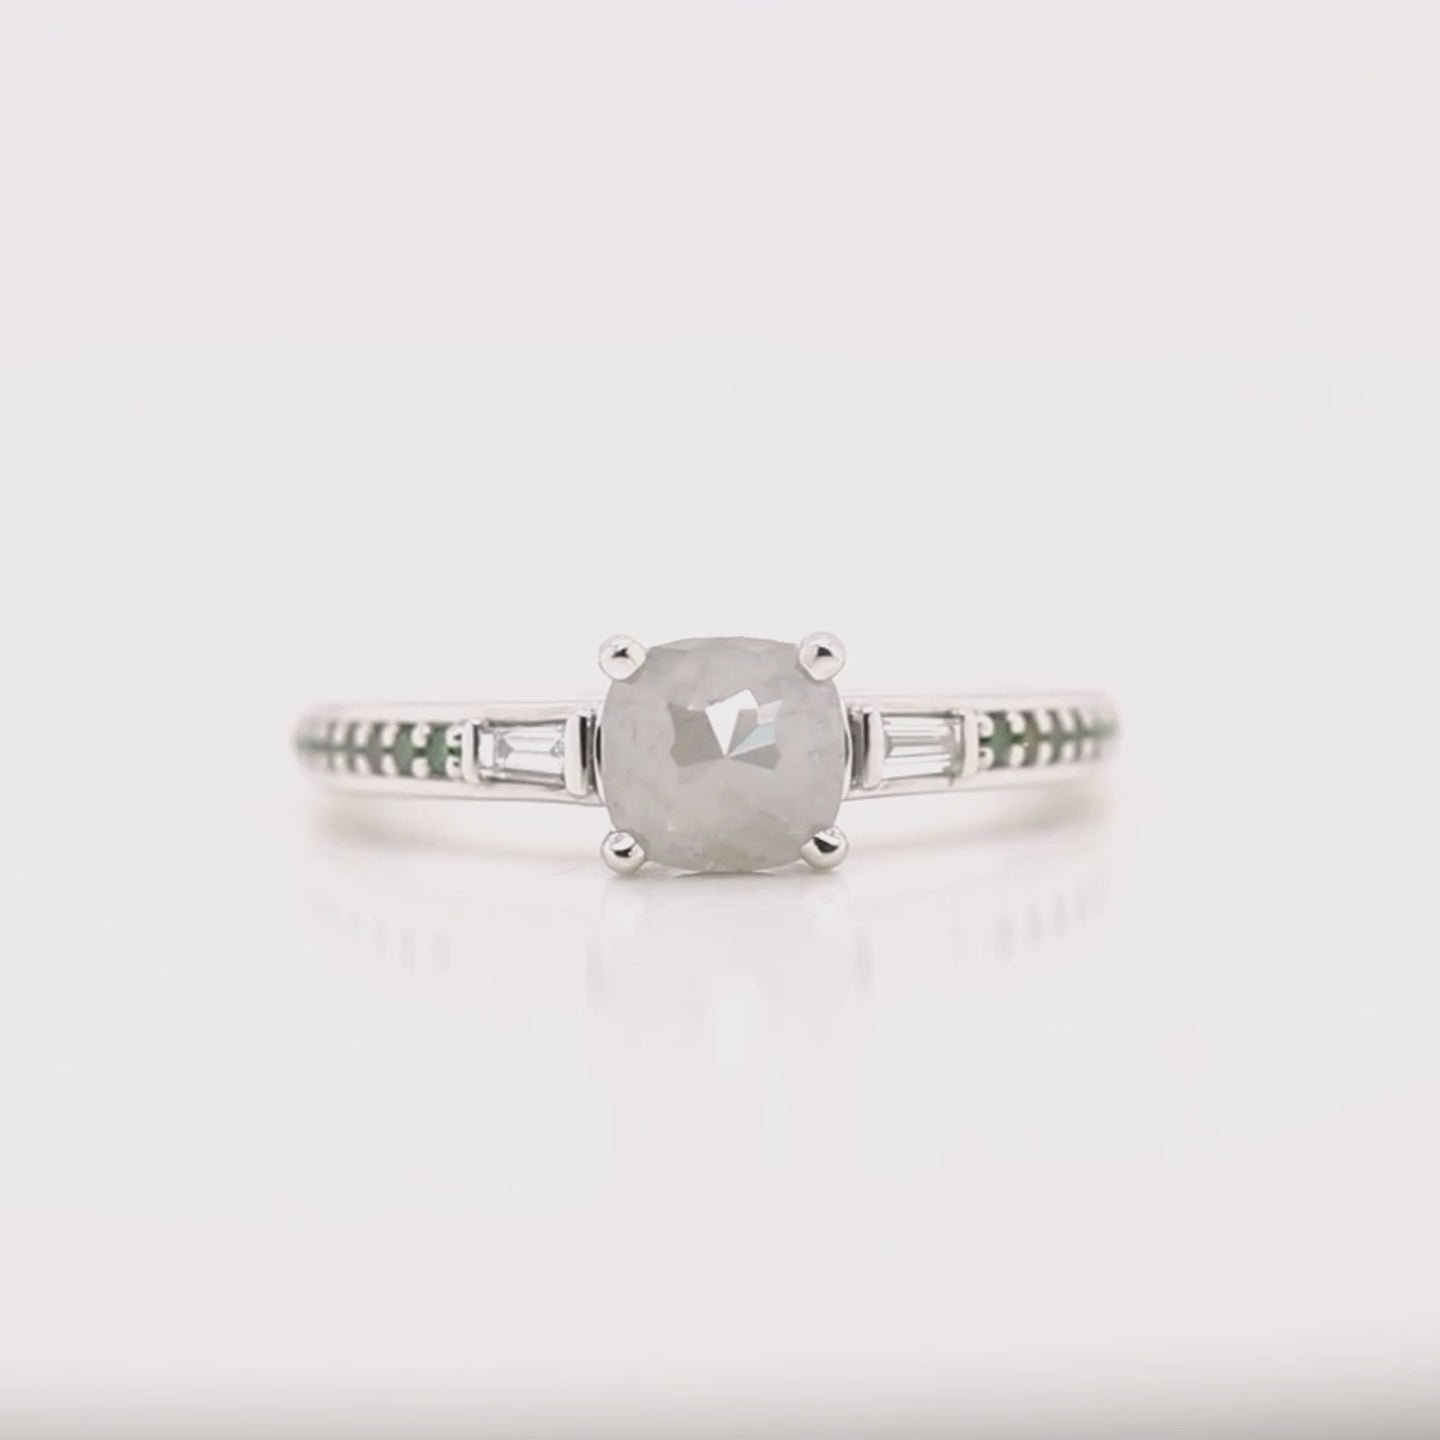 Beckett Ring with a 0.80 Carat Misty Gray Cushion Cut Diamond and Green Accent Diamonds in 14k White Gold - Ready to Size and Ship